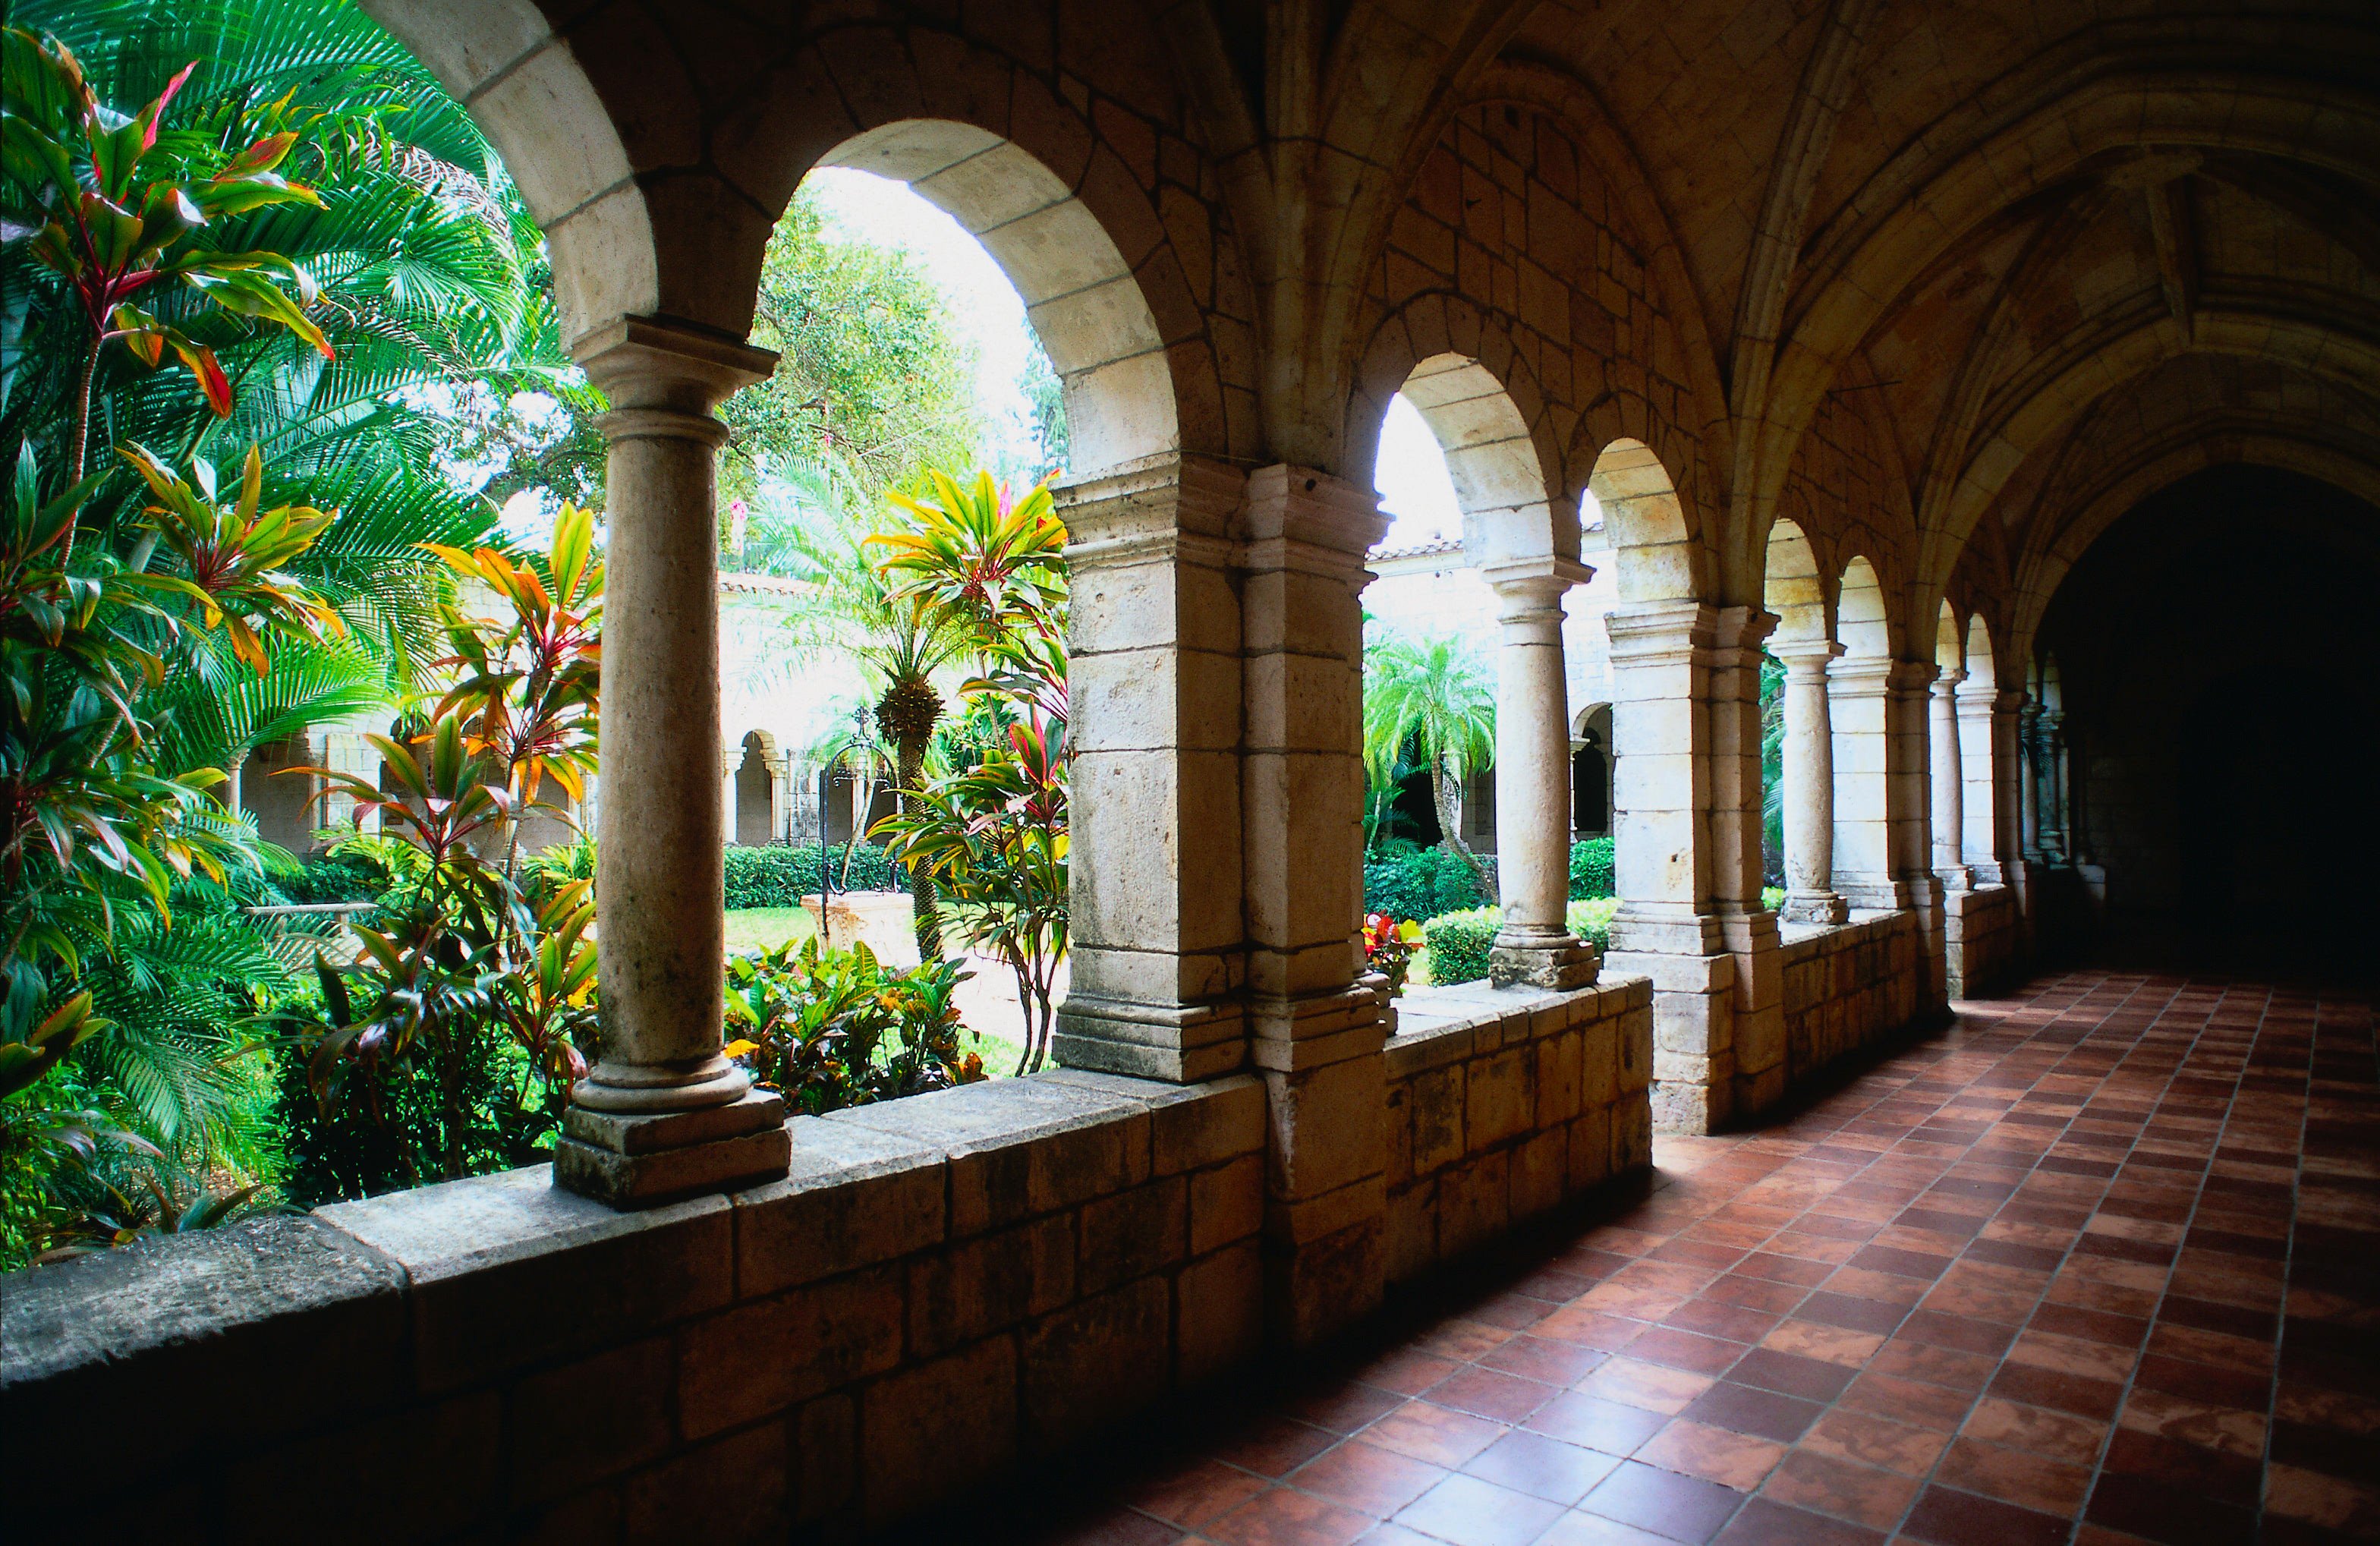 Ancient Spanish Monastery | Miami, USA Attractions - Lonely Planet